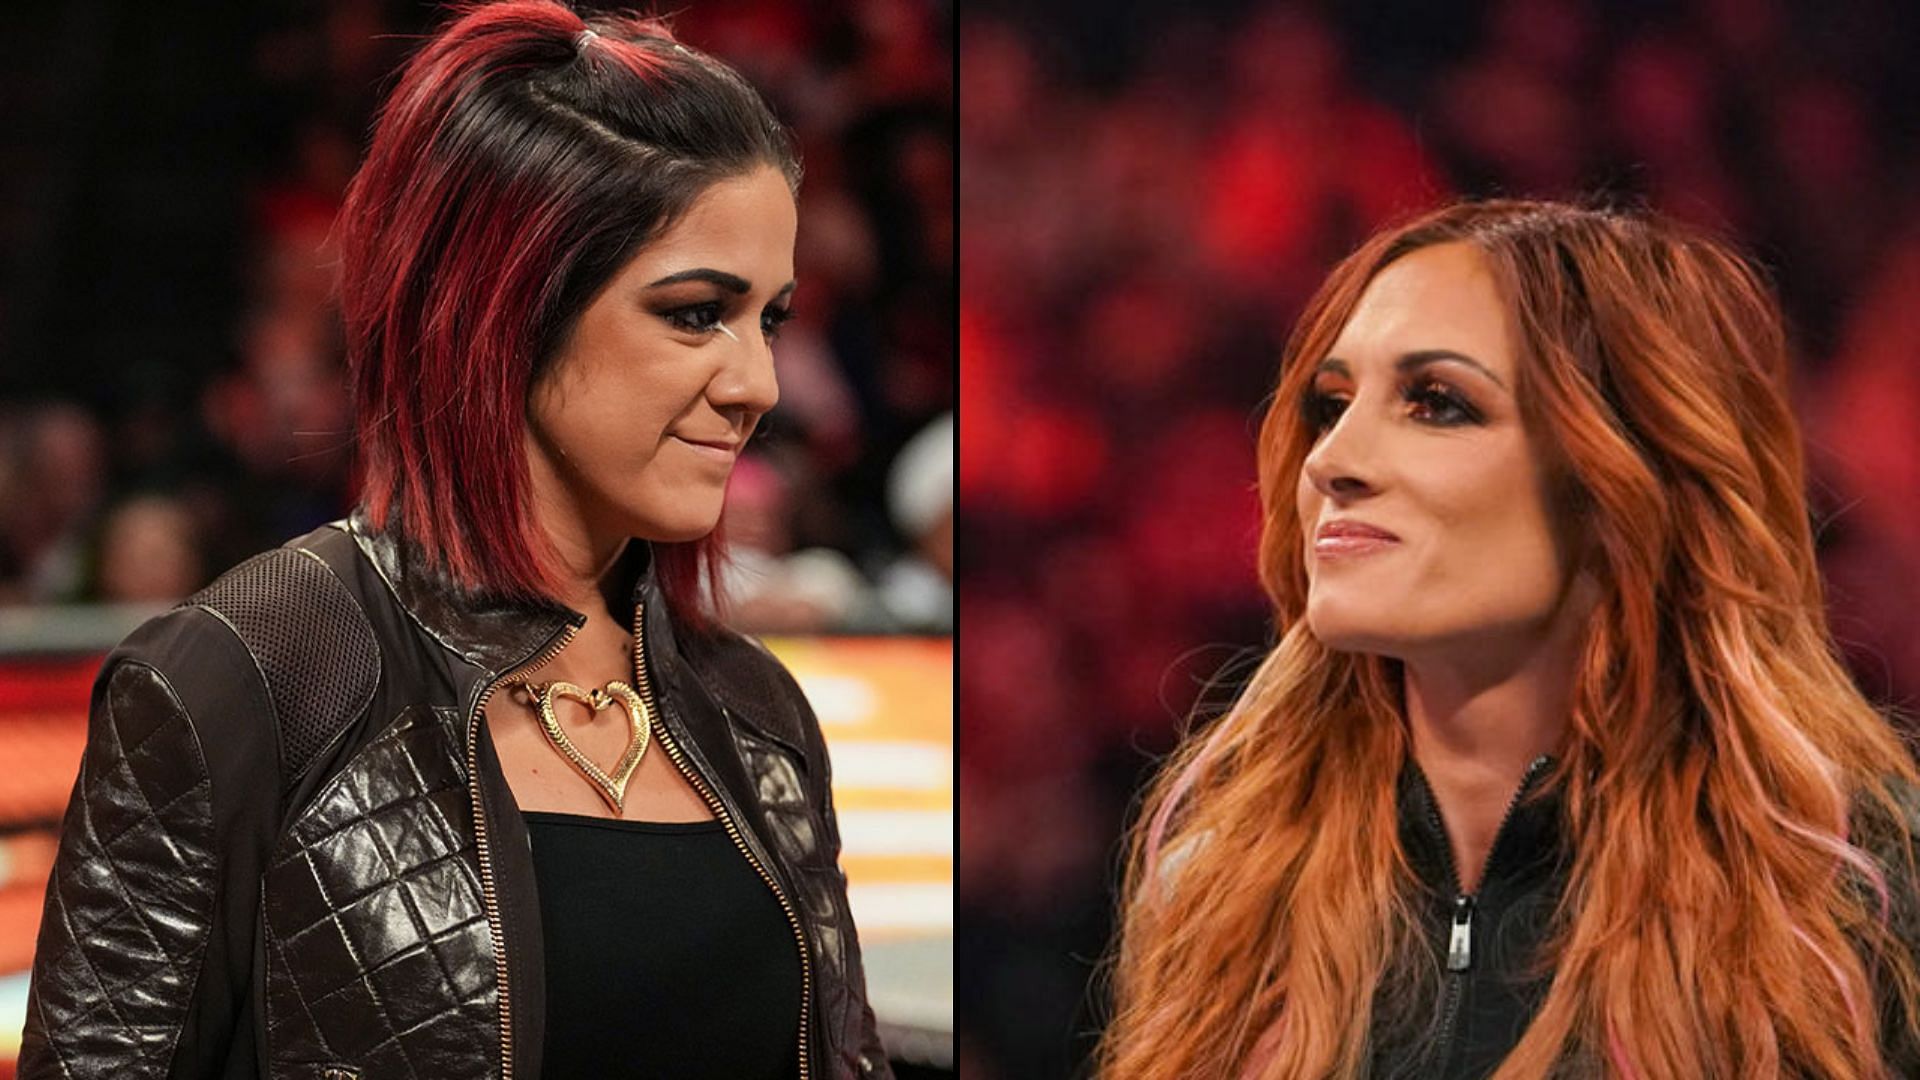 Bayley versus Becky Lynch in a Steel Cage match on WWE RAW tonight